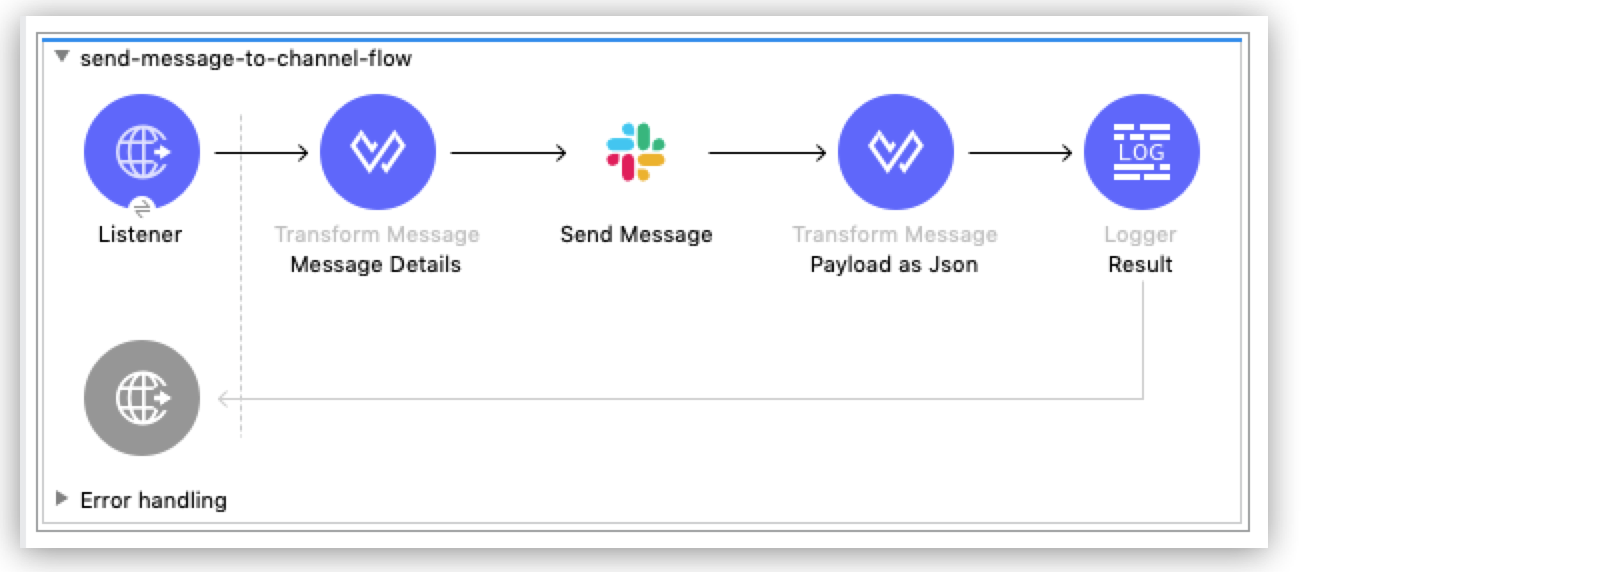 This app flow shows the components used in the Post a Message to a Channel example.